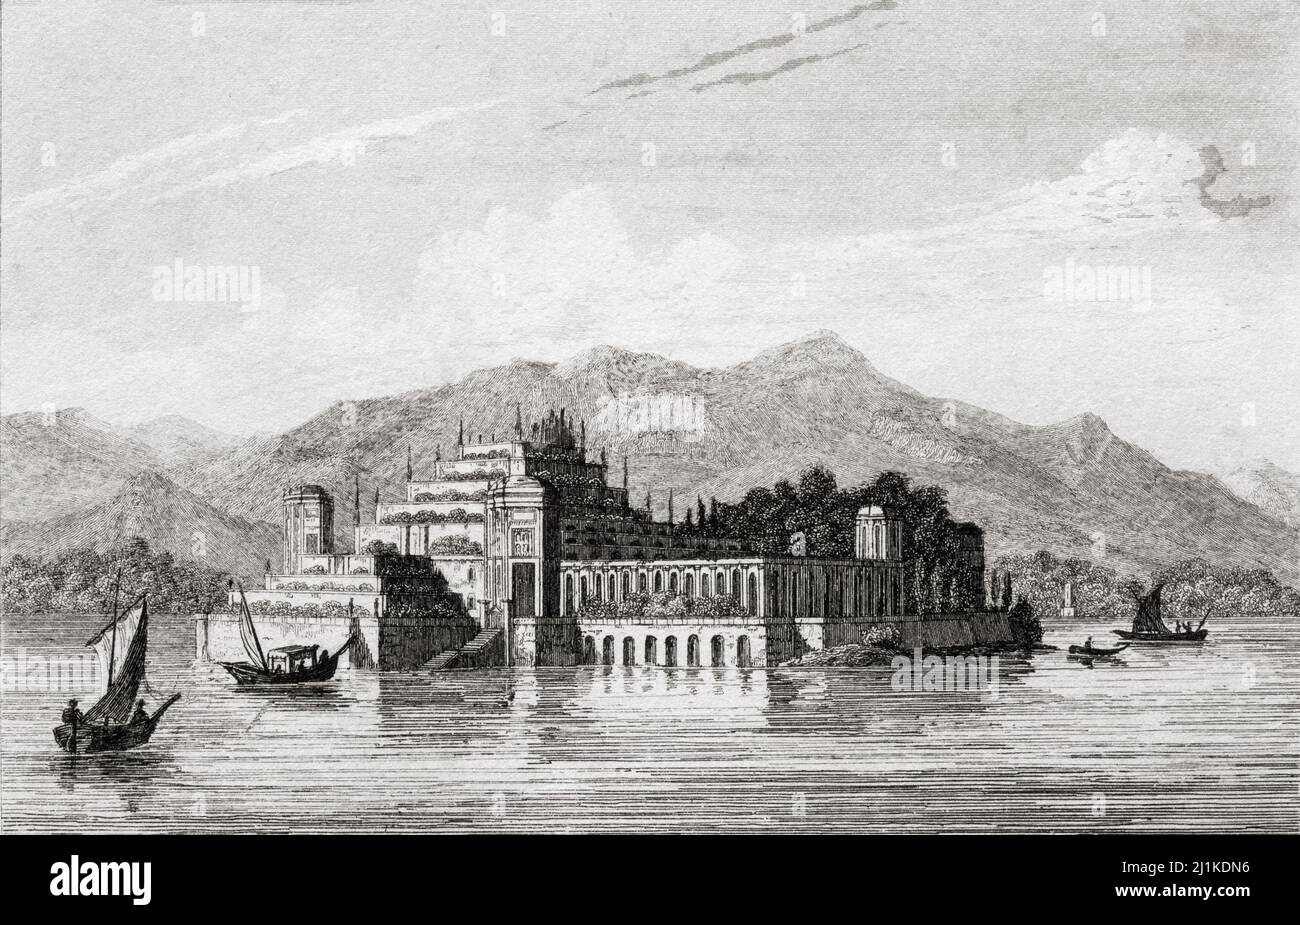 Isola Bella, Italy. 19th century steel engraving by Lemaitre direxit. Stock Photo